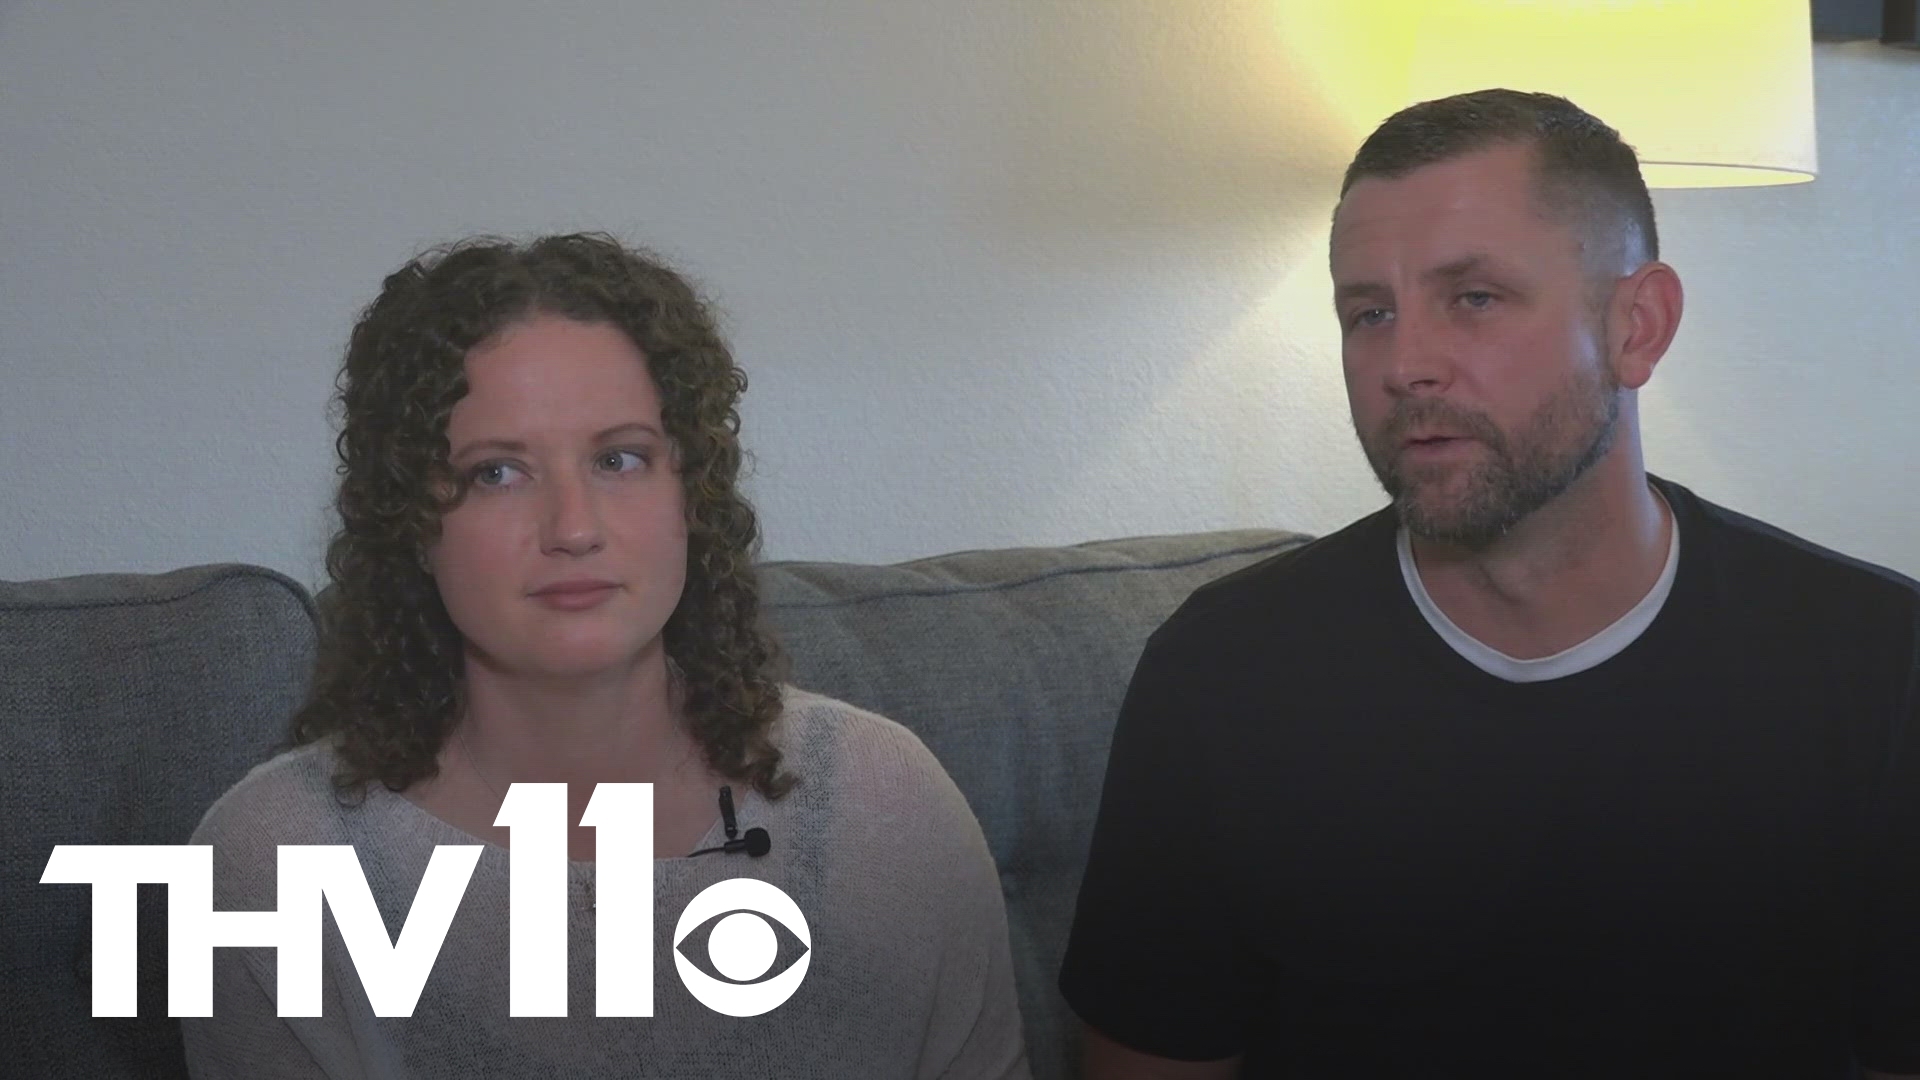 An Arkansas family who was faced with tragedy years ago, is now using their heroic story of recovery to help other people.